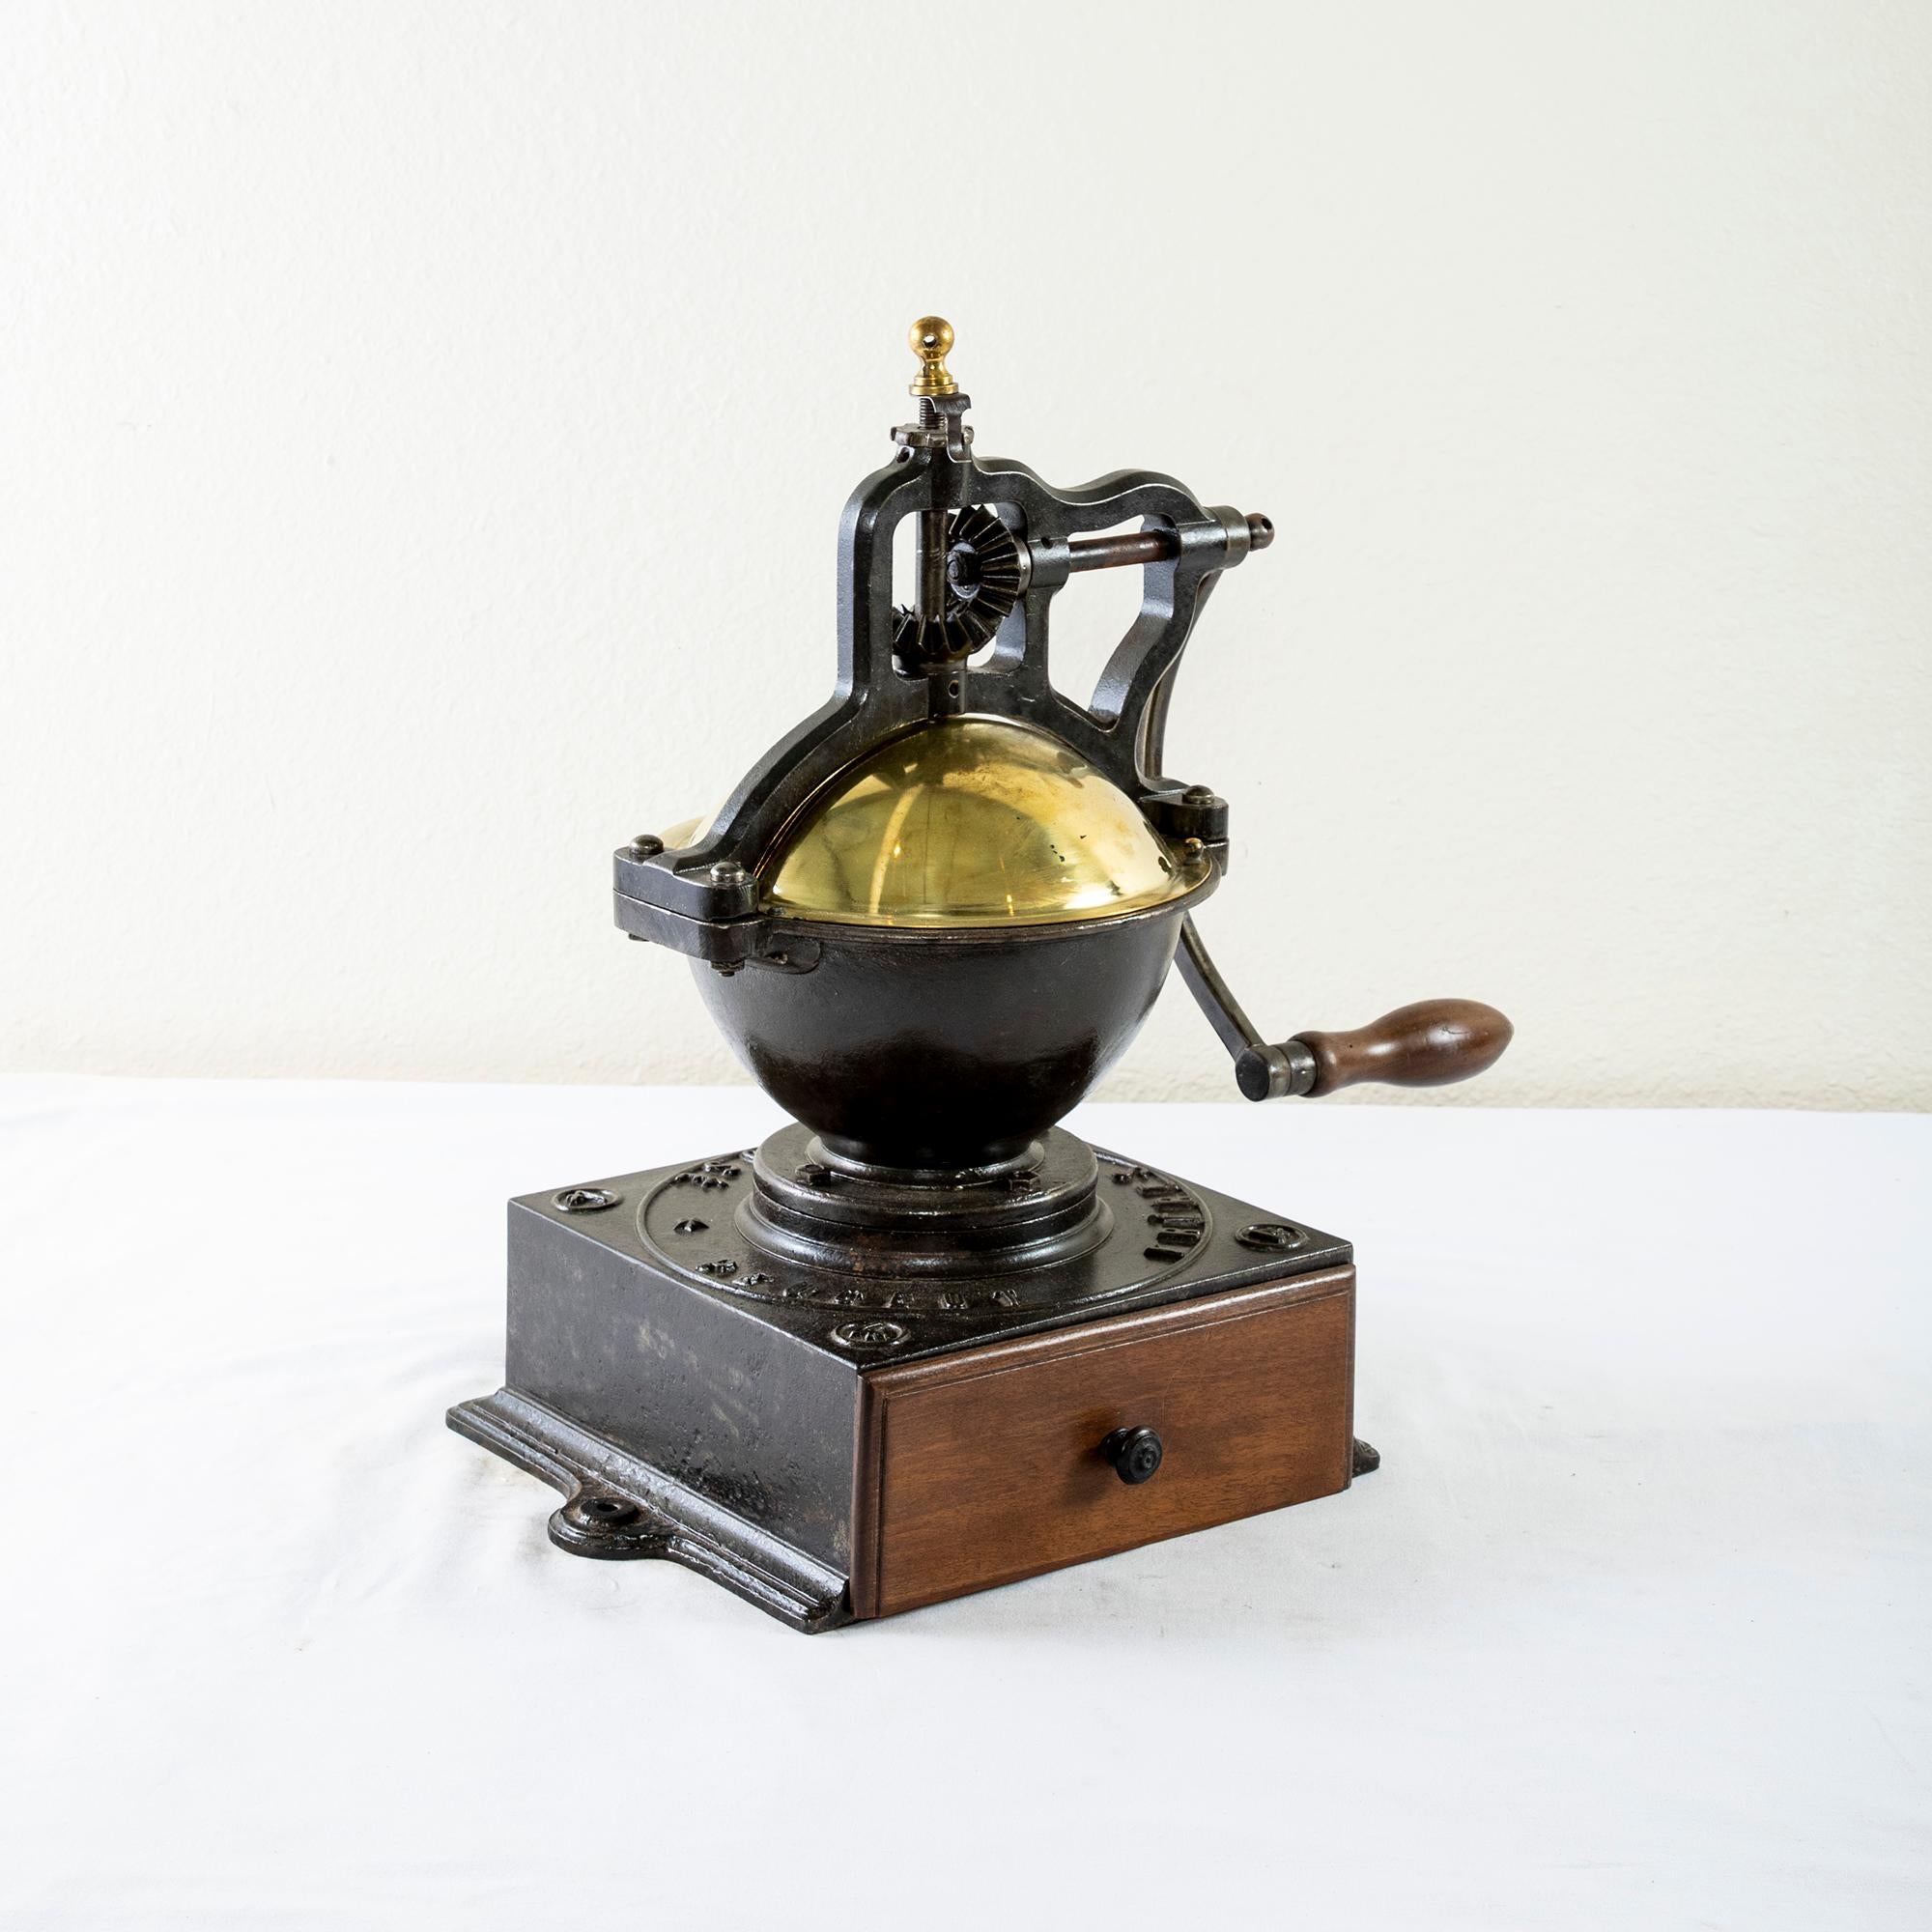 This very large late 19th century iron coffee grinder was originally used in a French bistro. Marked Peugeot Freres Brevetes SGDG, and the number 4, this coffee grinder was the second largest in size ever produced by Peugeot Freres. Its brass cover